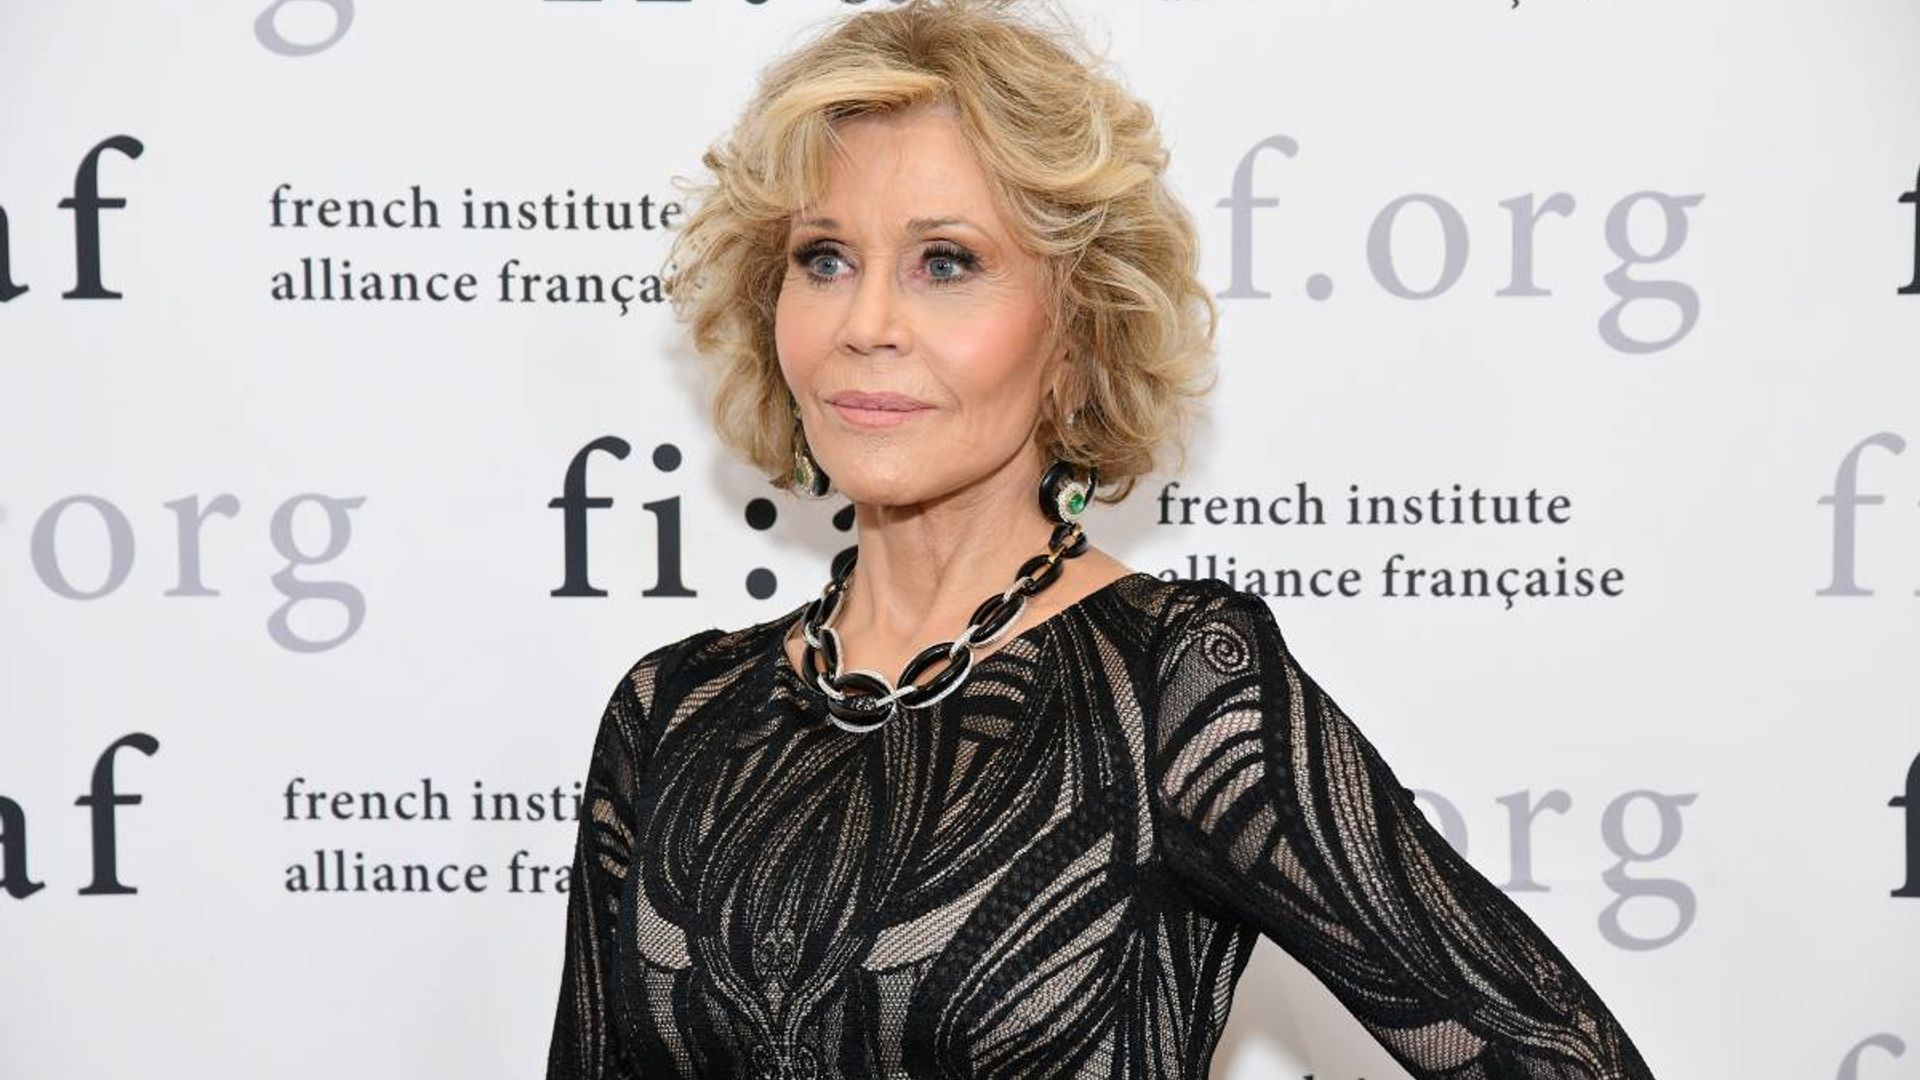 Jane Fonda's toned physique is phenomenal in new workout photos